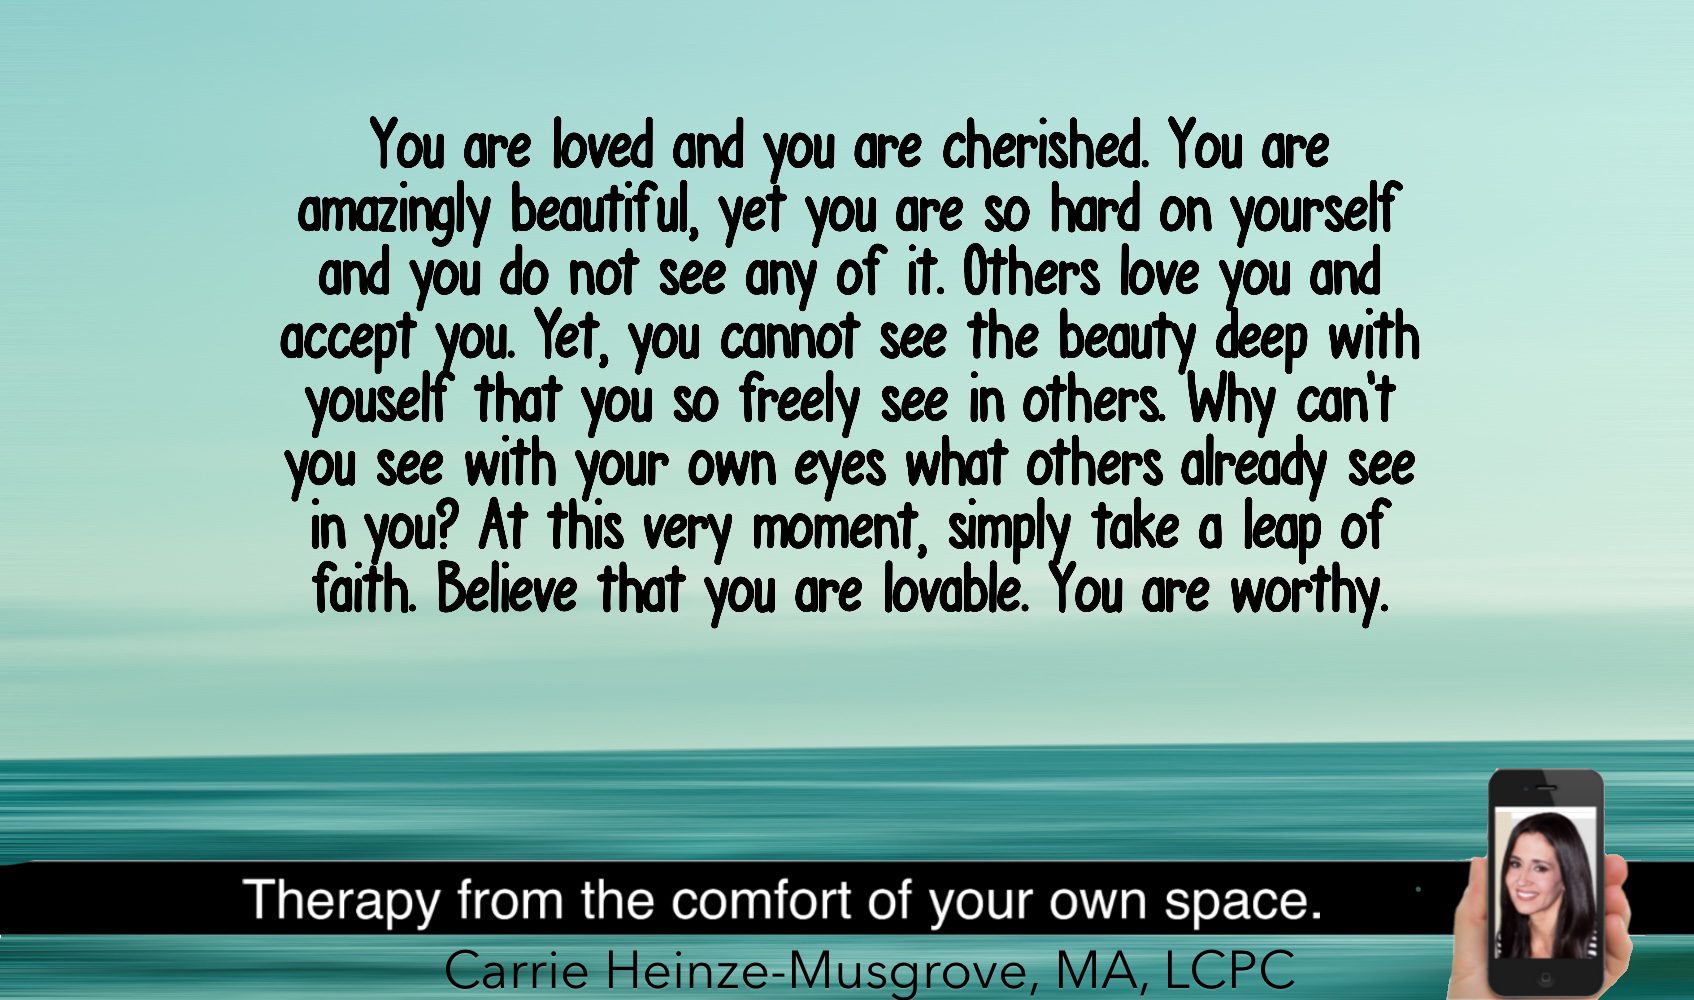 You are worthy.